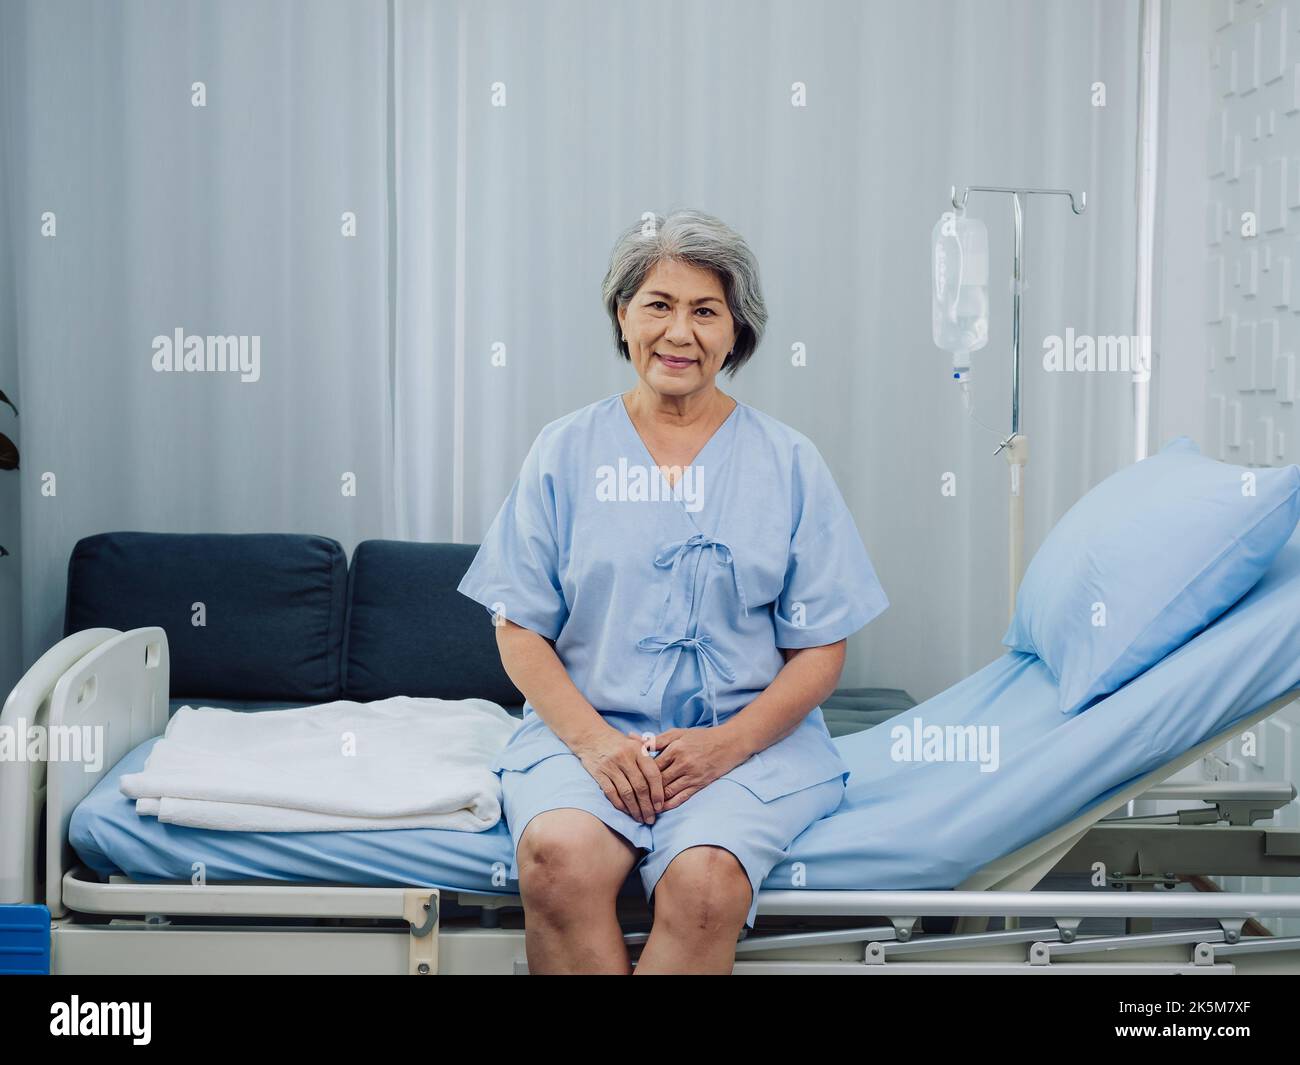 Happy smile beautiful Asian elderly old woman patient with knee surgery in light blue dress sitting on bed near the medical IV pole stand with saline Stock Photo